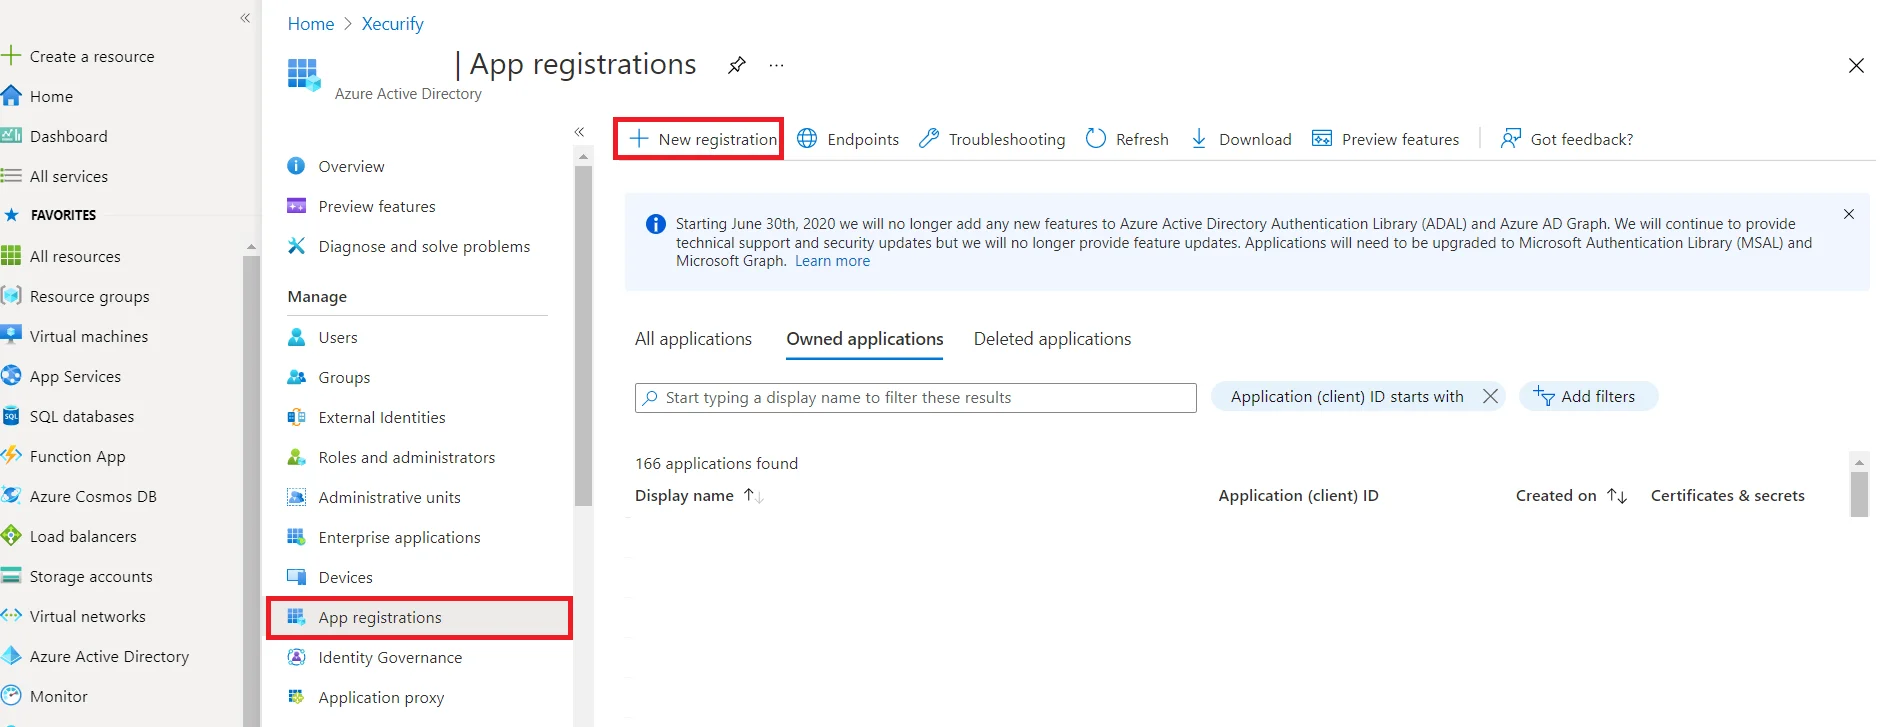 Azure AD Single Sign On  (SSO) (Active Directory) Oauth OIDC Joomla, Microsoft Azure AD (Active Directory) SSO App-Registration